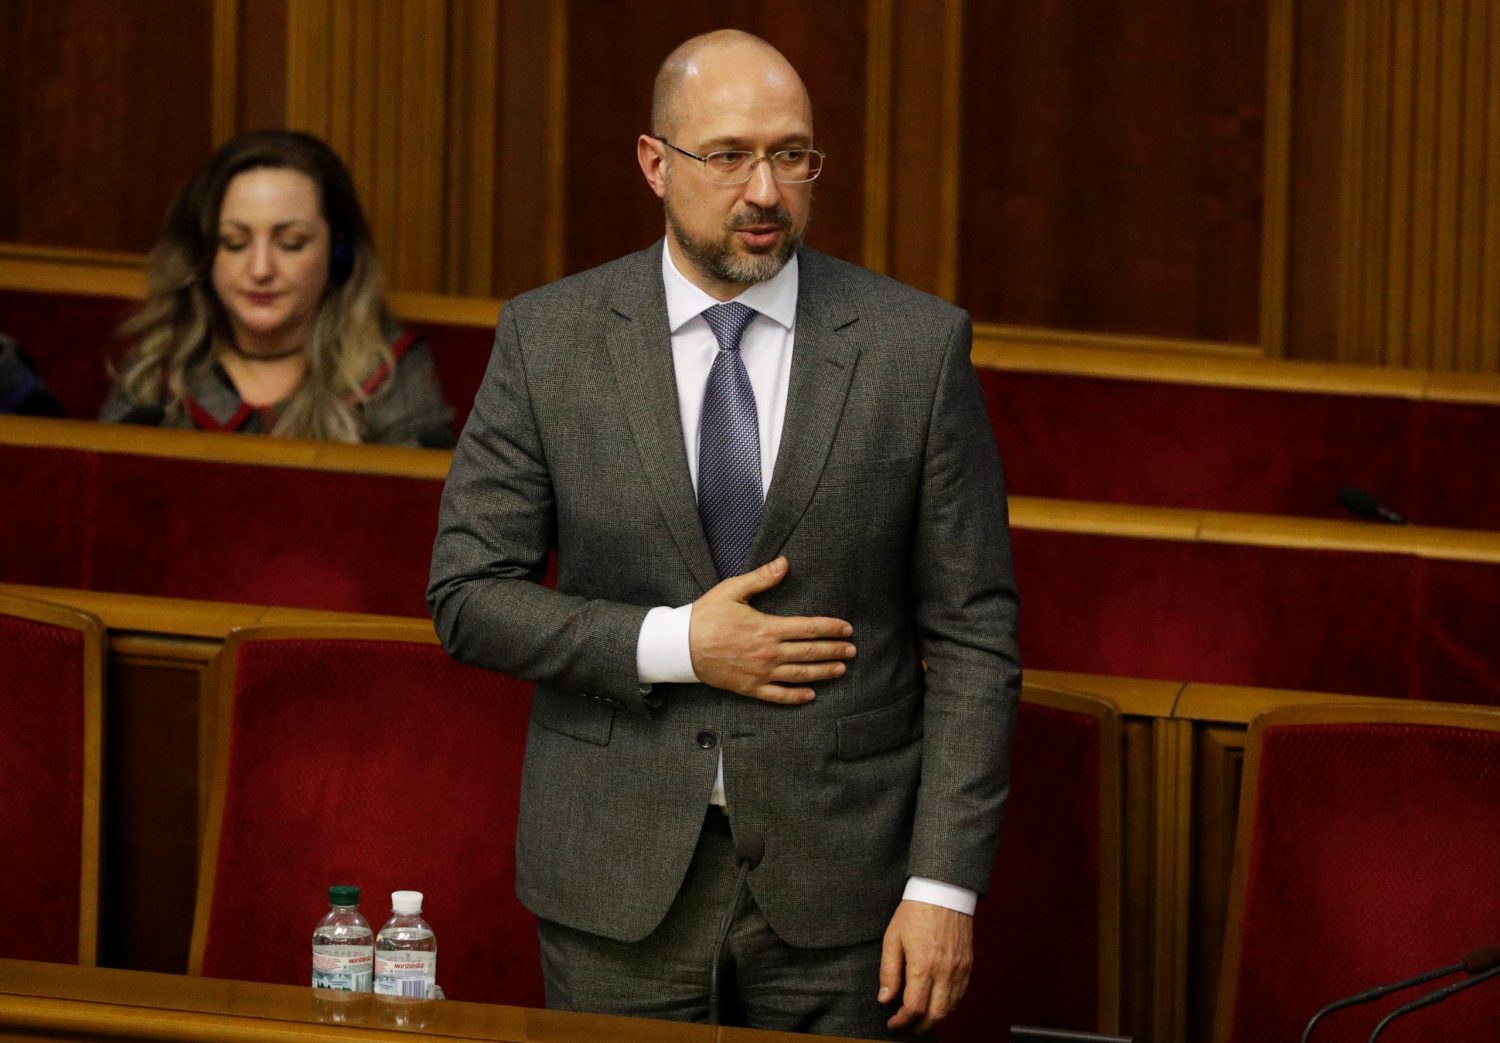 Ukraine’s new government must act fast or face failure